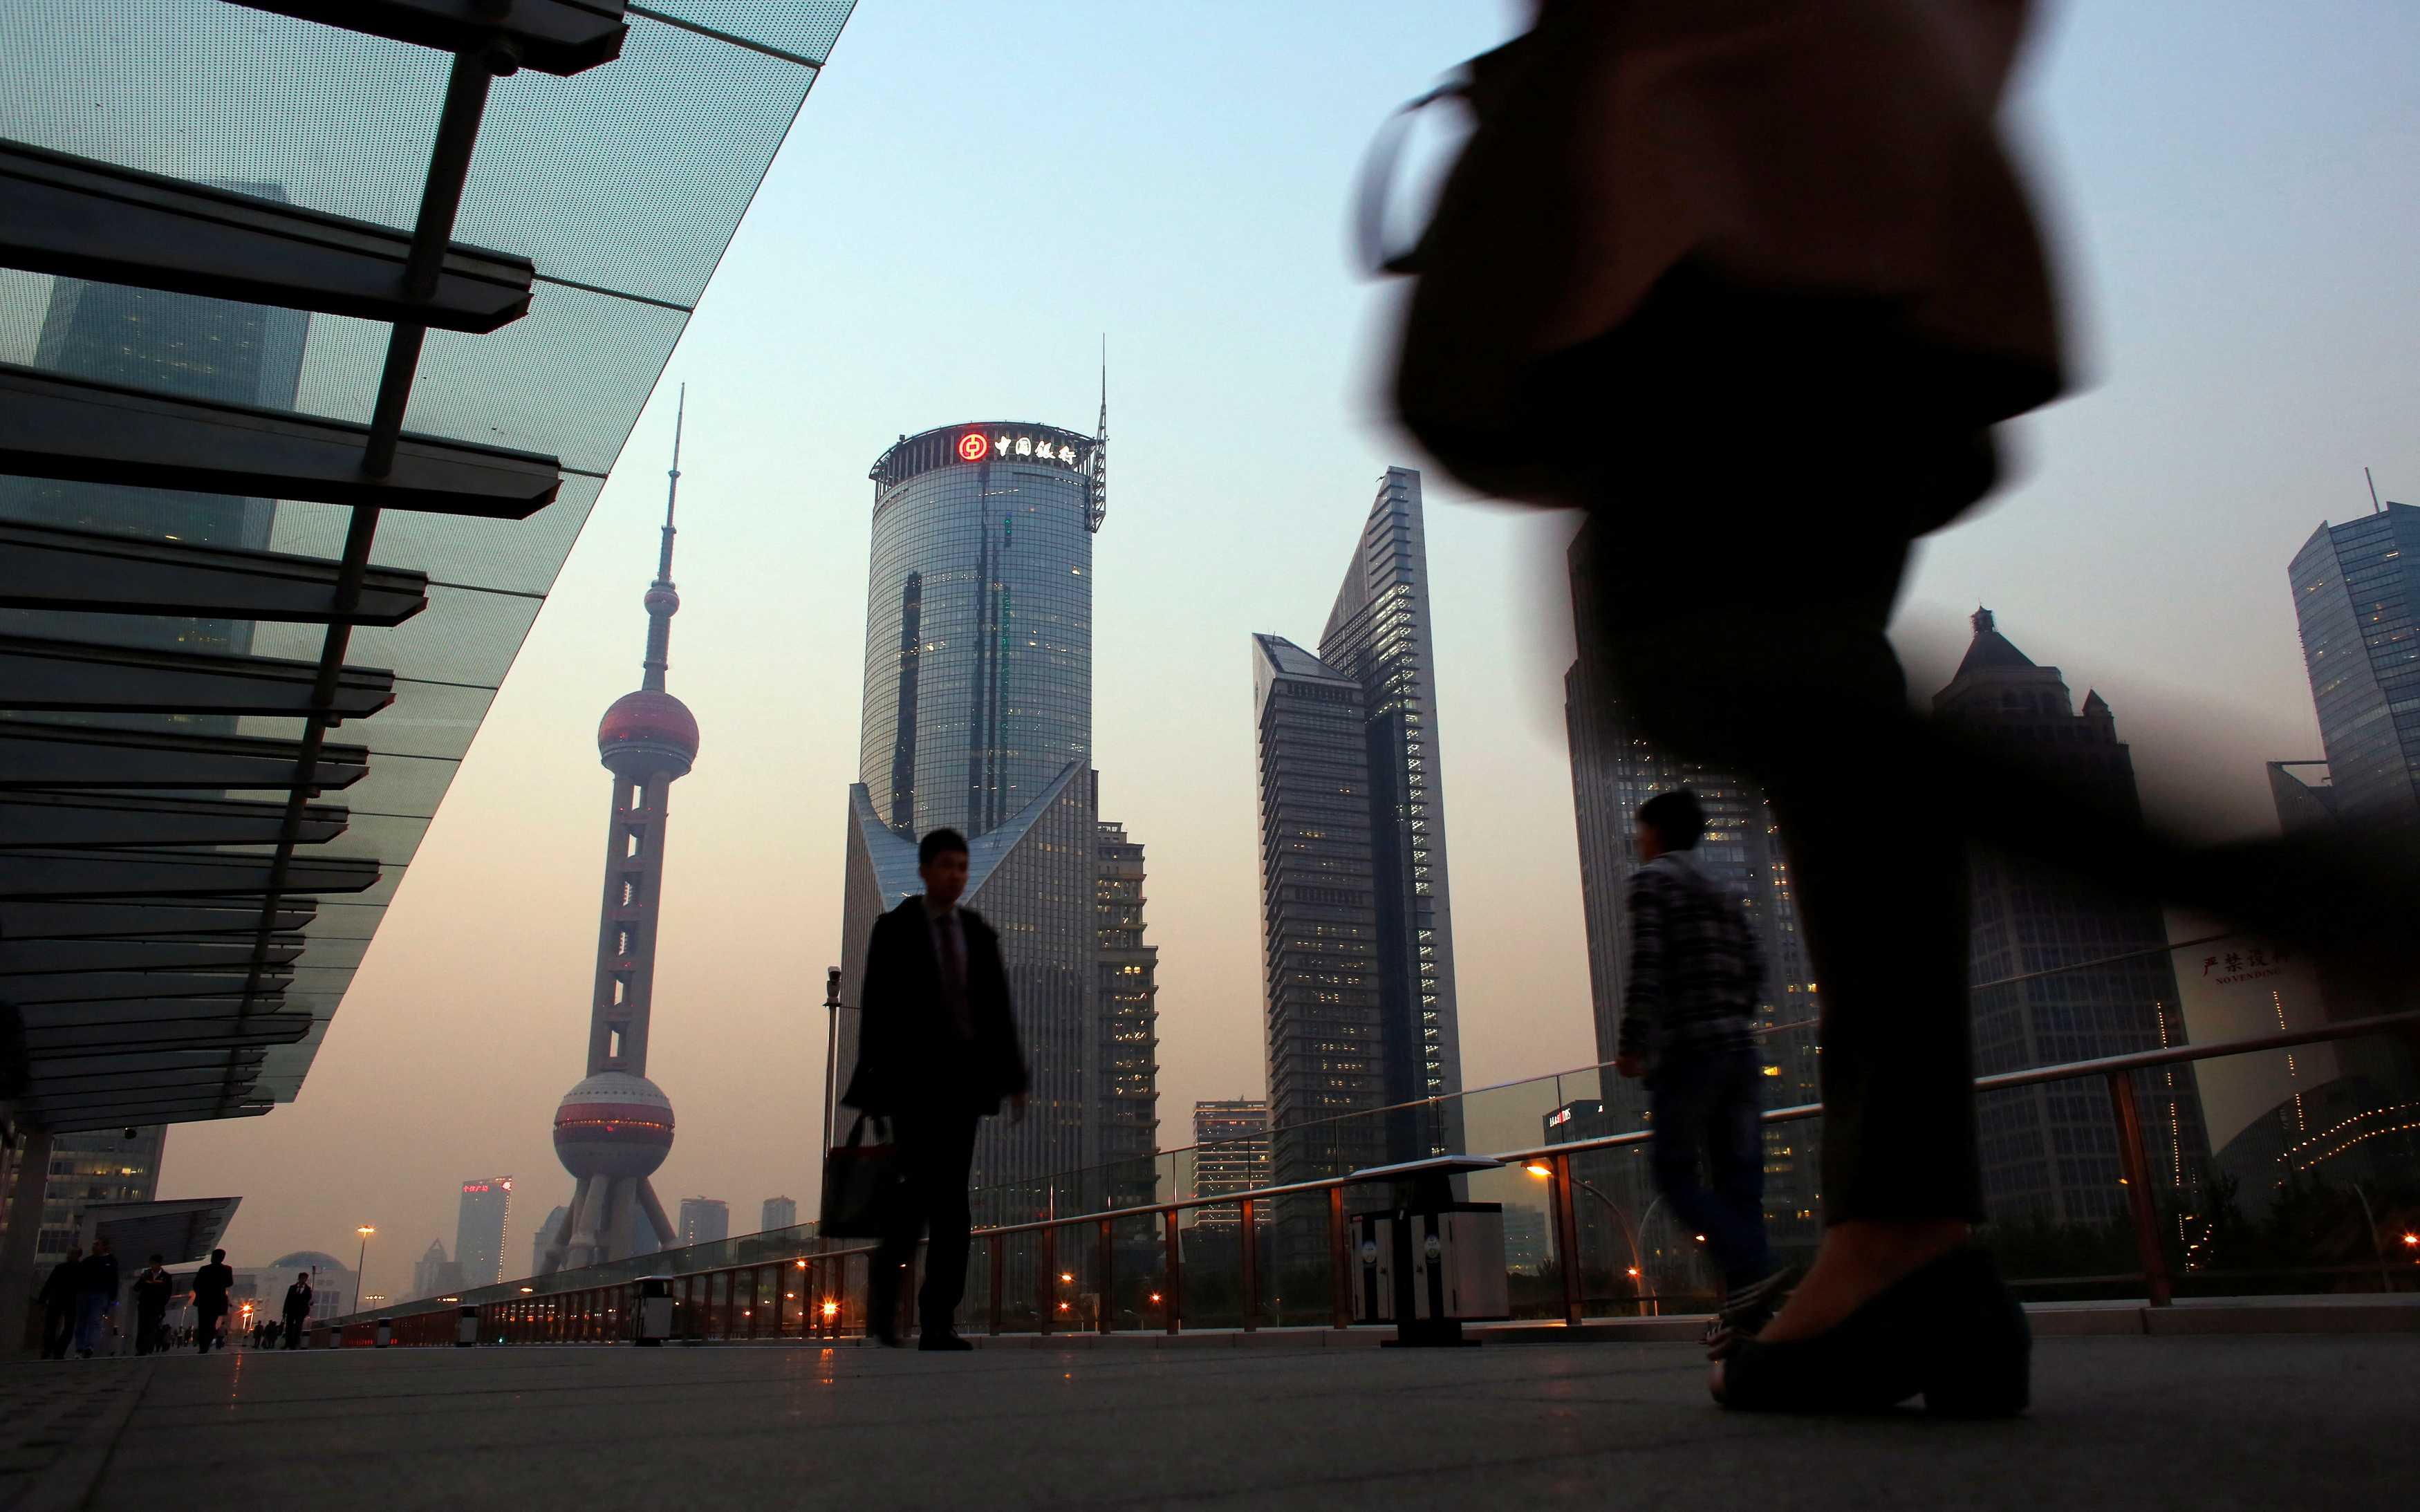 People walk along an elevated walkway at the Pudong financial district in Shanghai Nov 20, 2013. Photo: Reuters